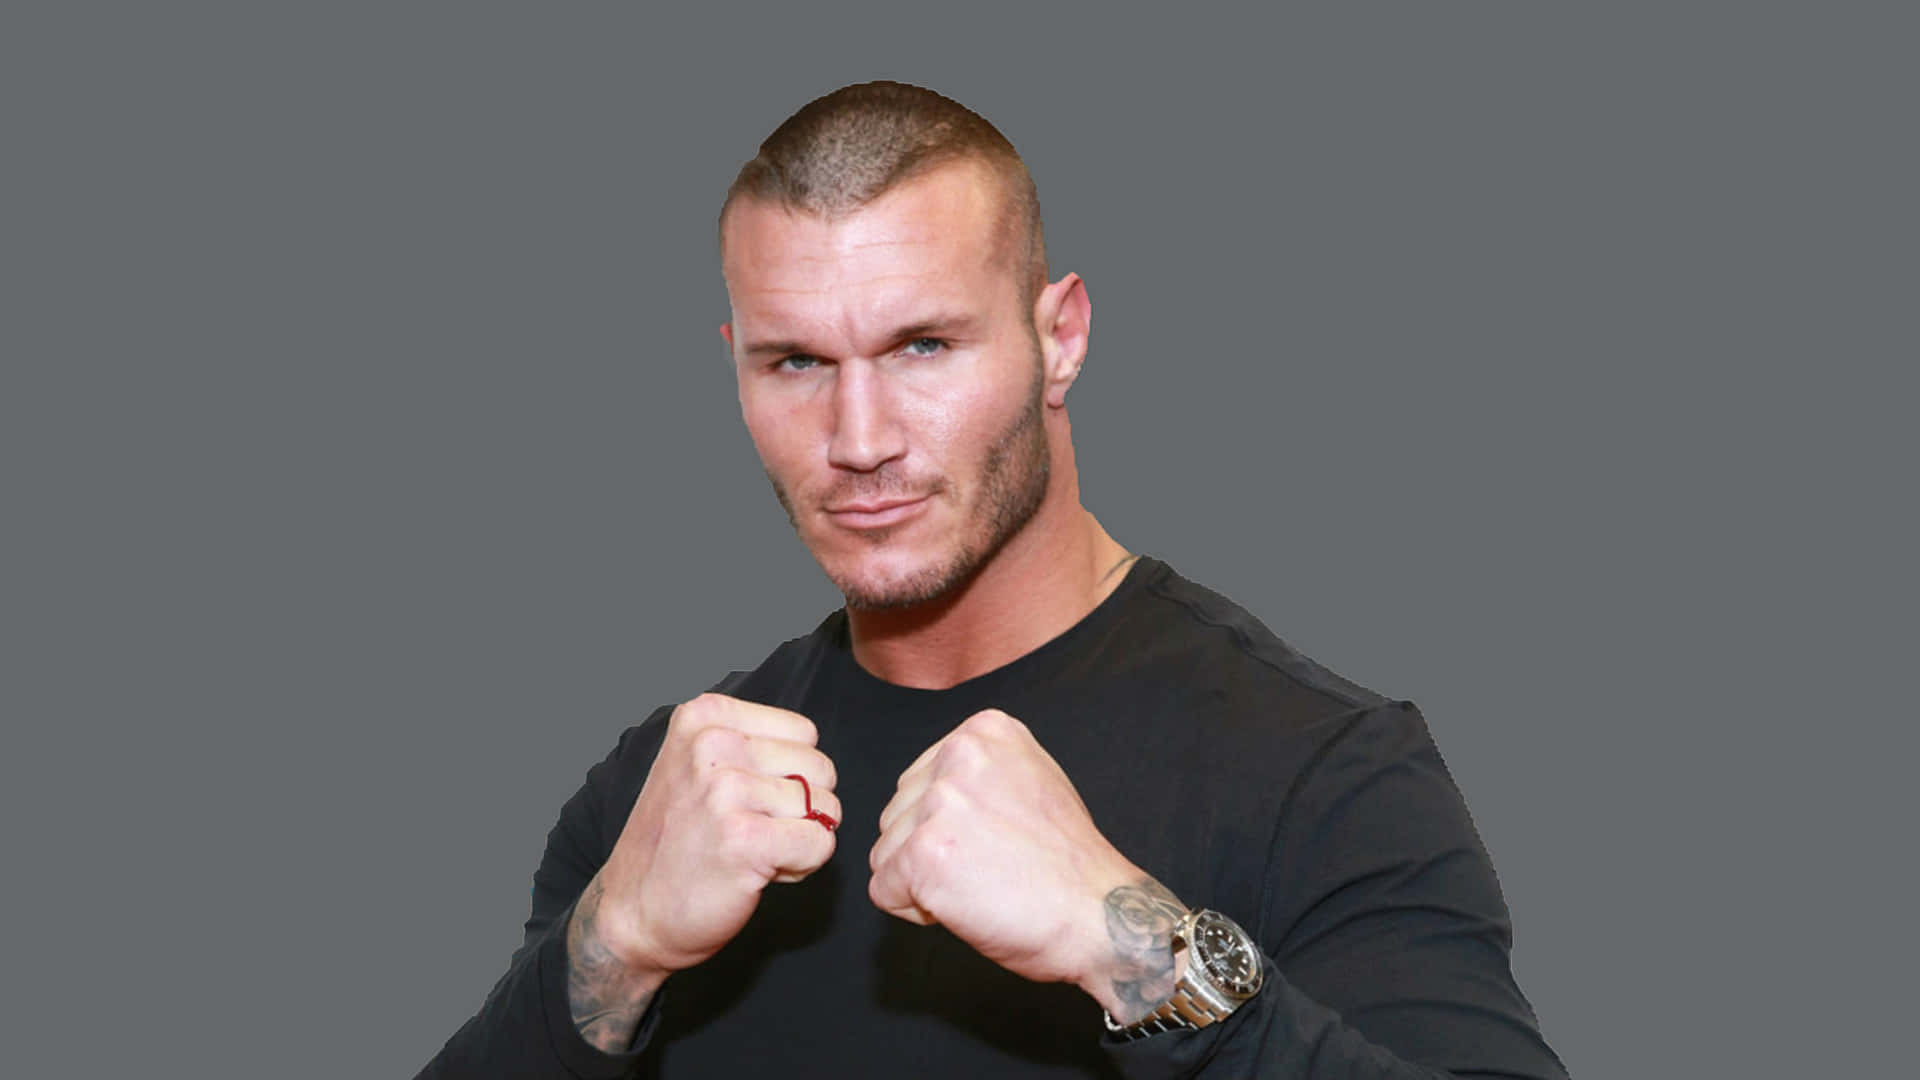 WWE Superstar Randy Orton Stuns Crowds with His Athletic Perfomance Wallpaper